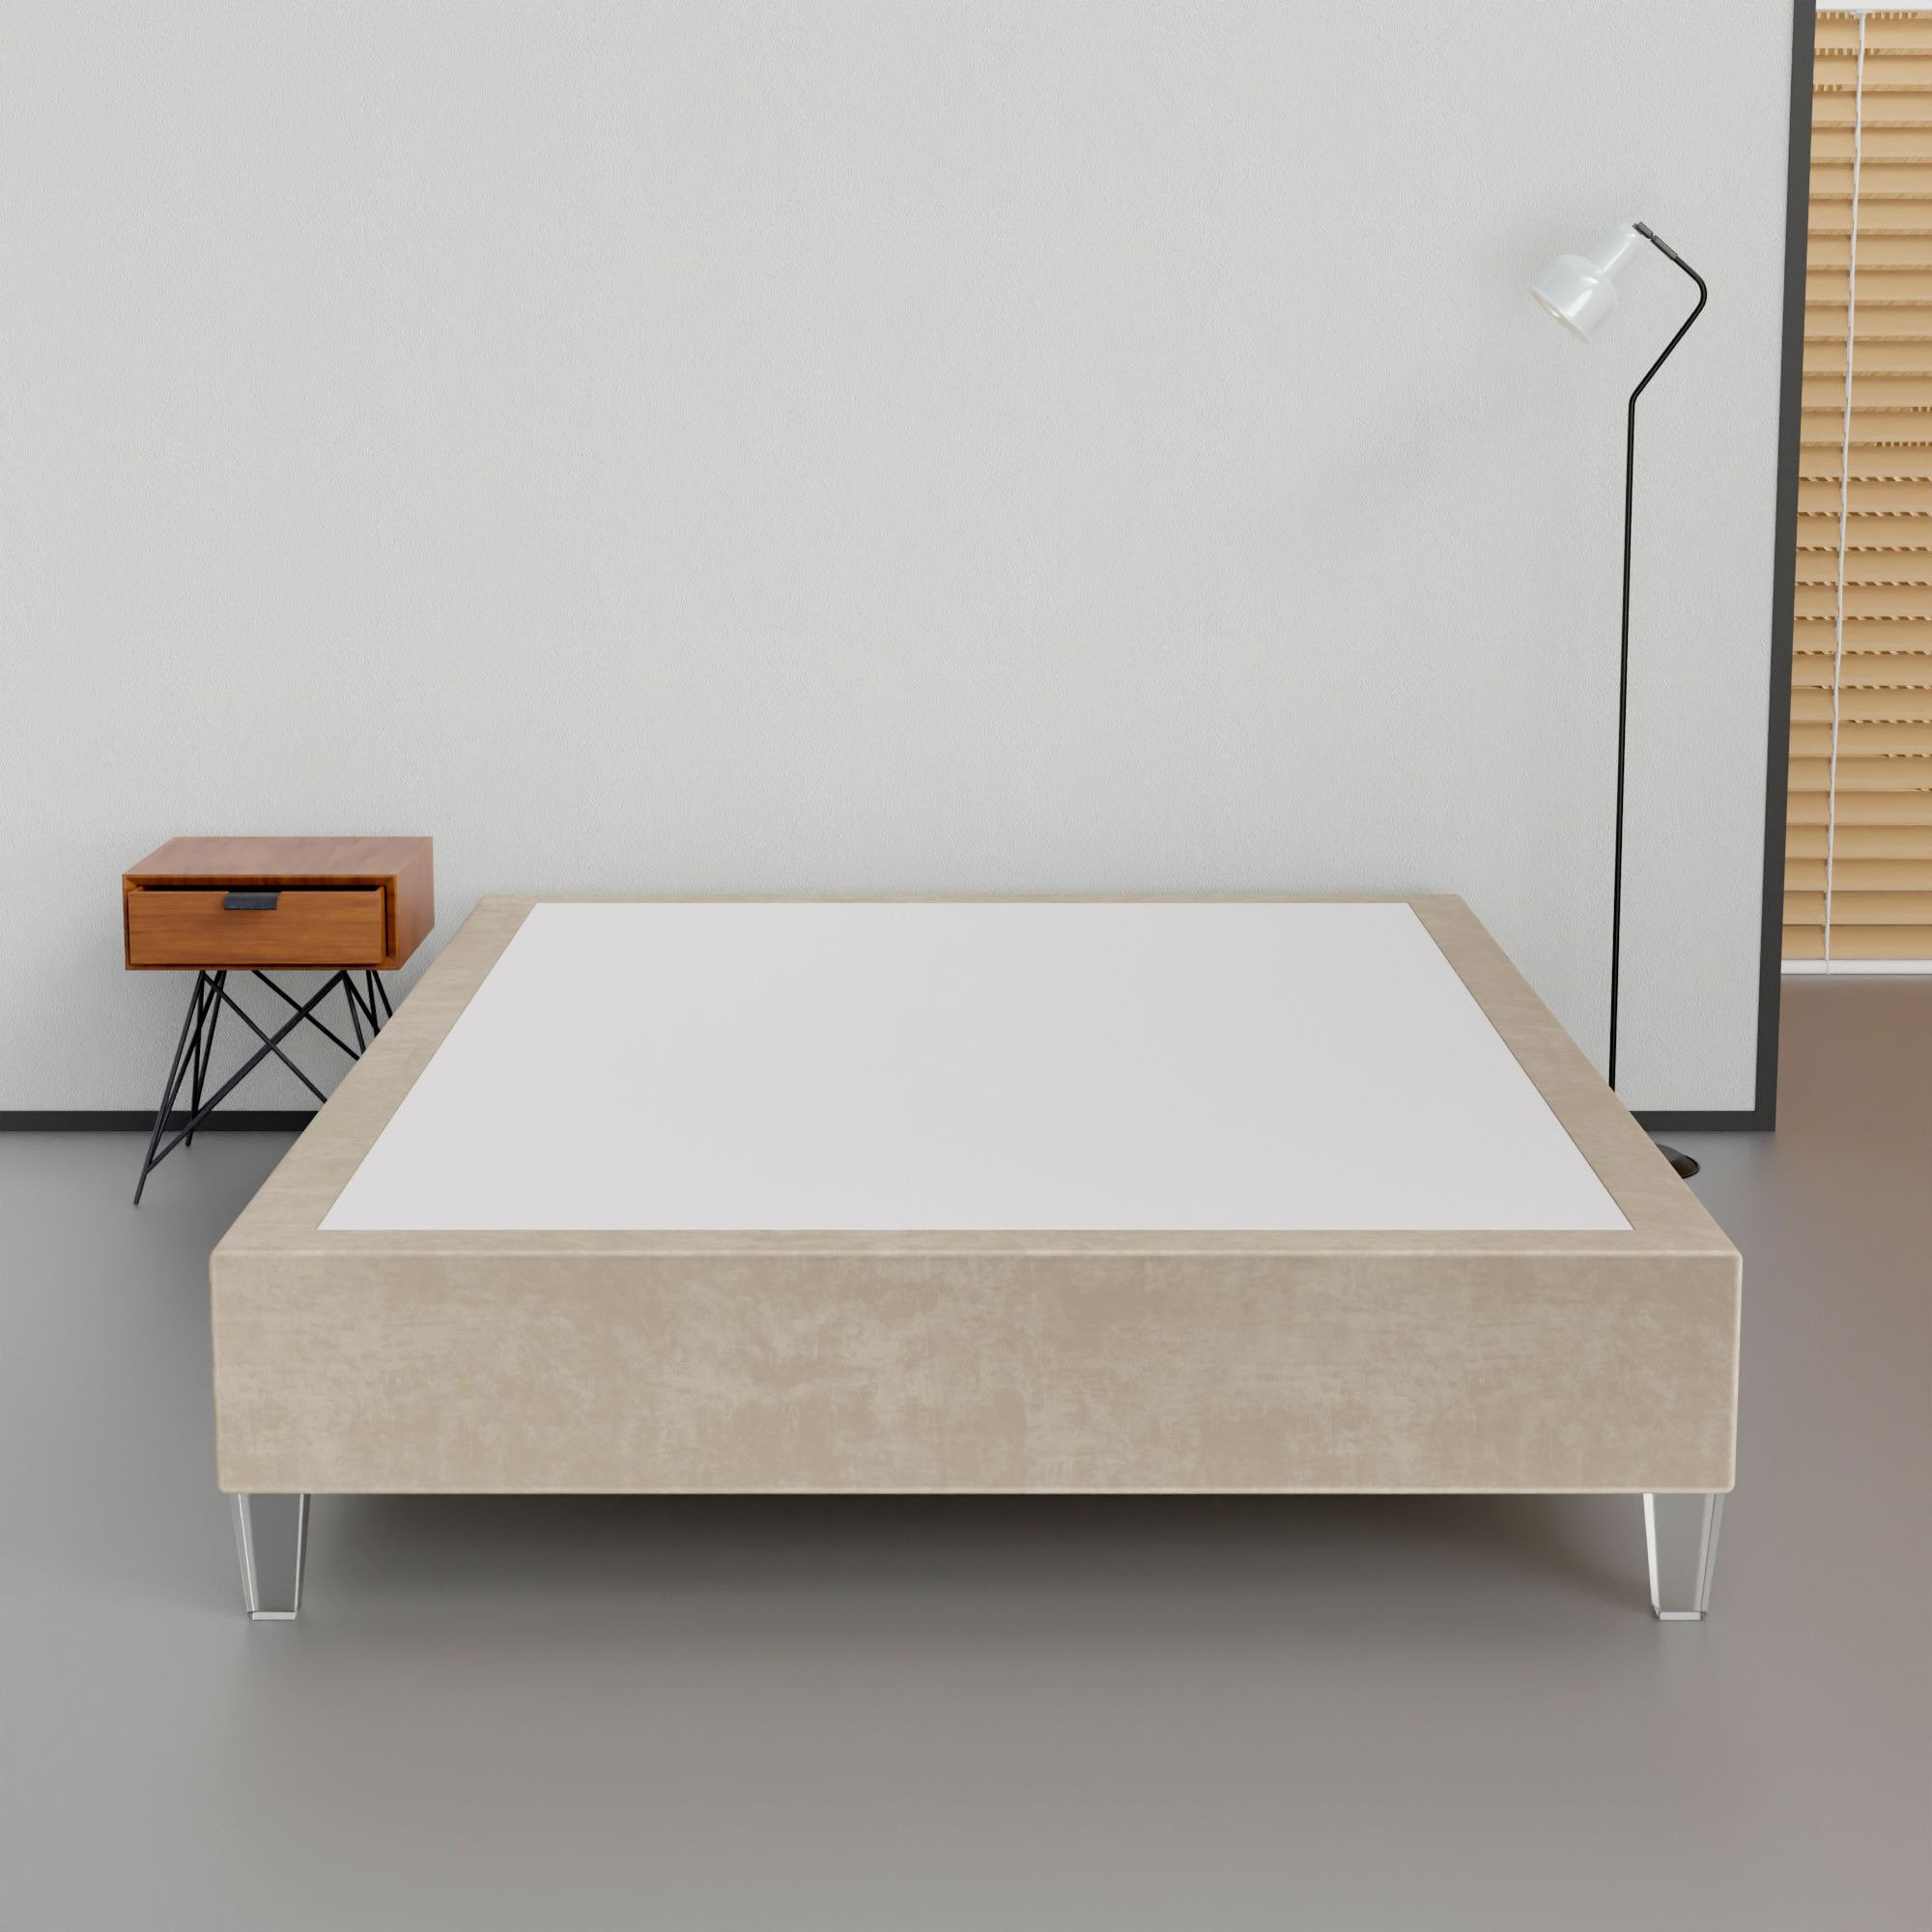 Spinal Solution 14-Inch Premium Velvet Acrylic Material Wood Bed